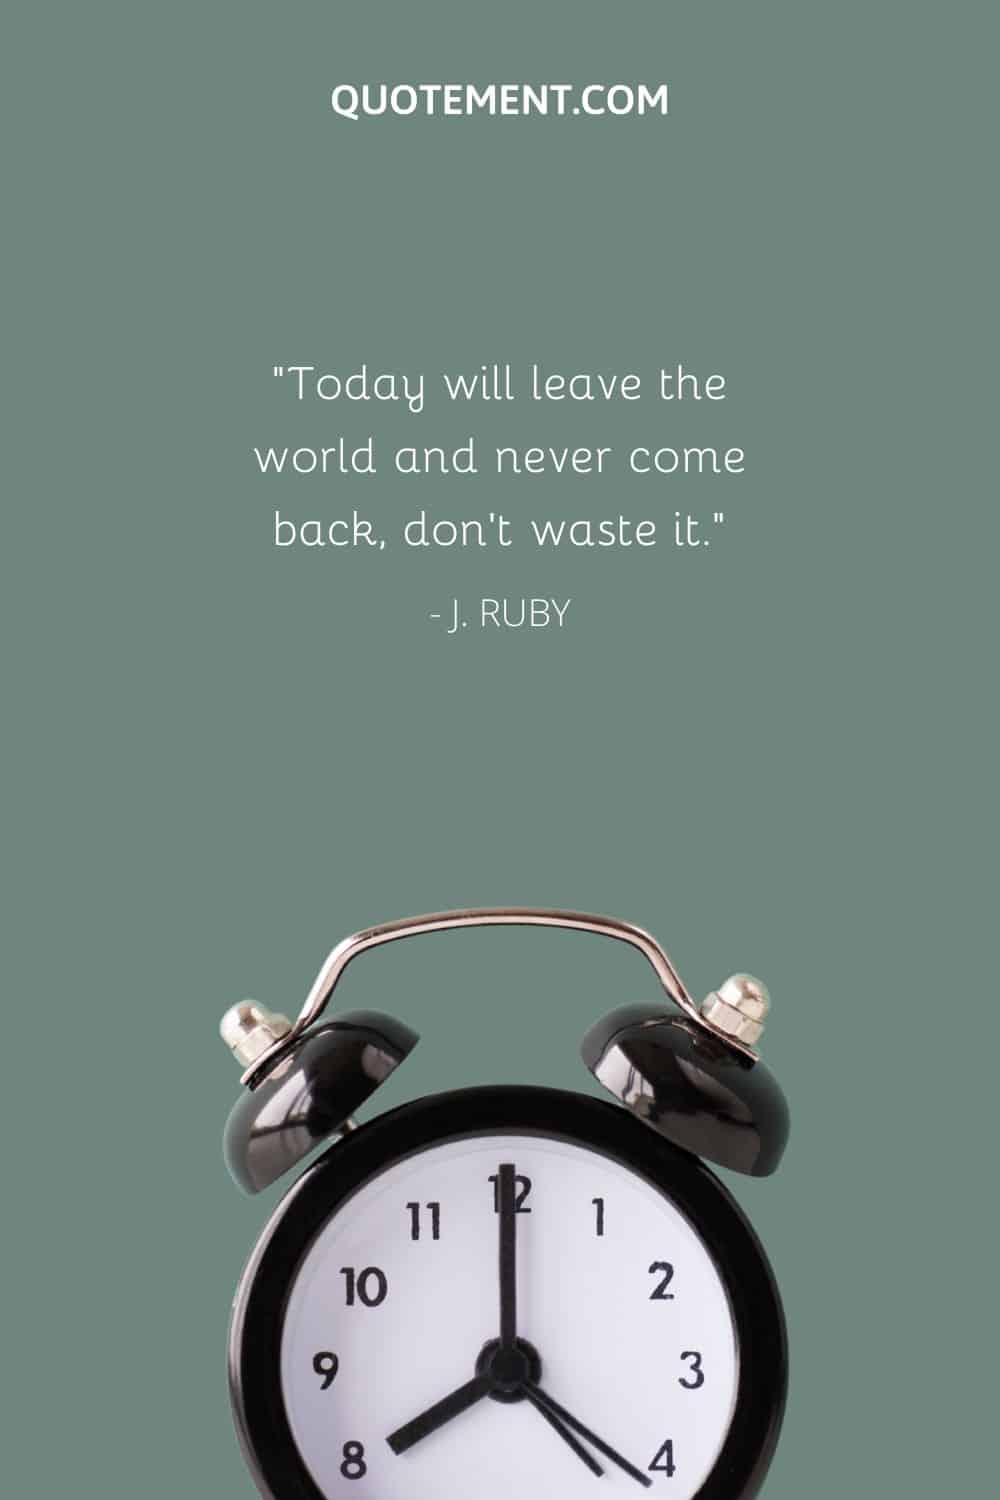 Today will leave the world and never come back, don’t waste it.